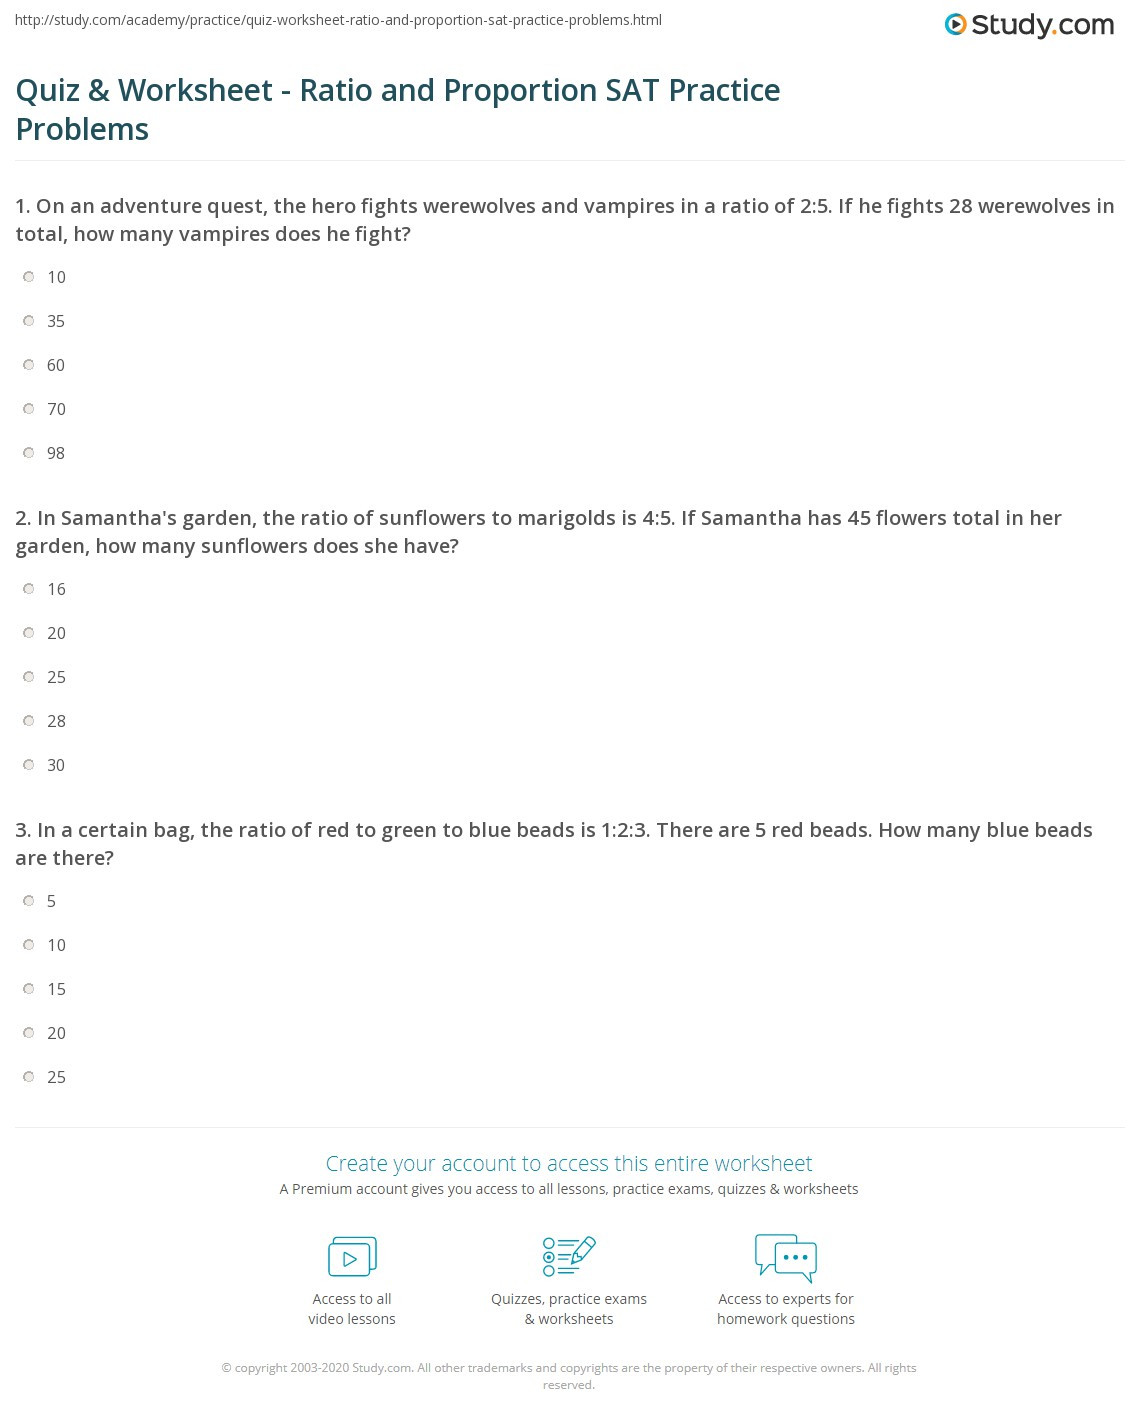 Ratio and Proportion Worksheet Quiz &amp; Worksheet Ratio and Proportion Sat Practice